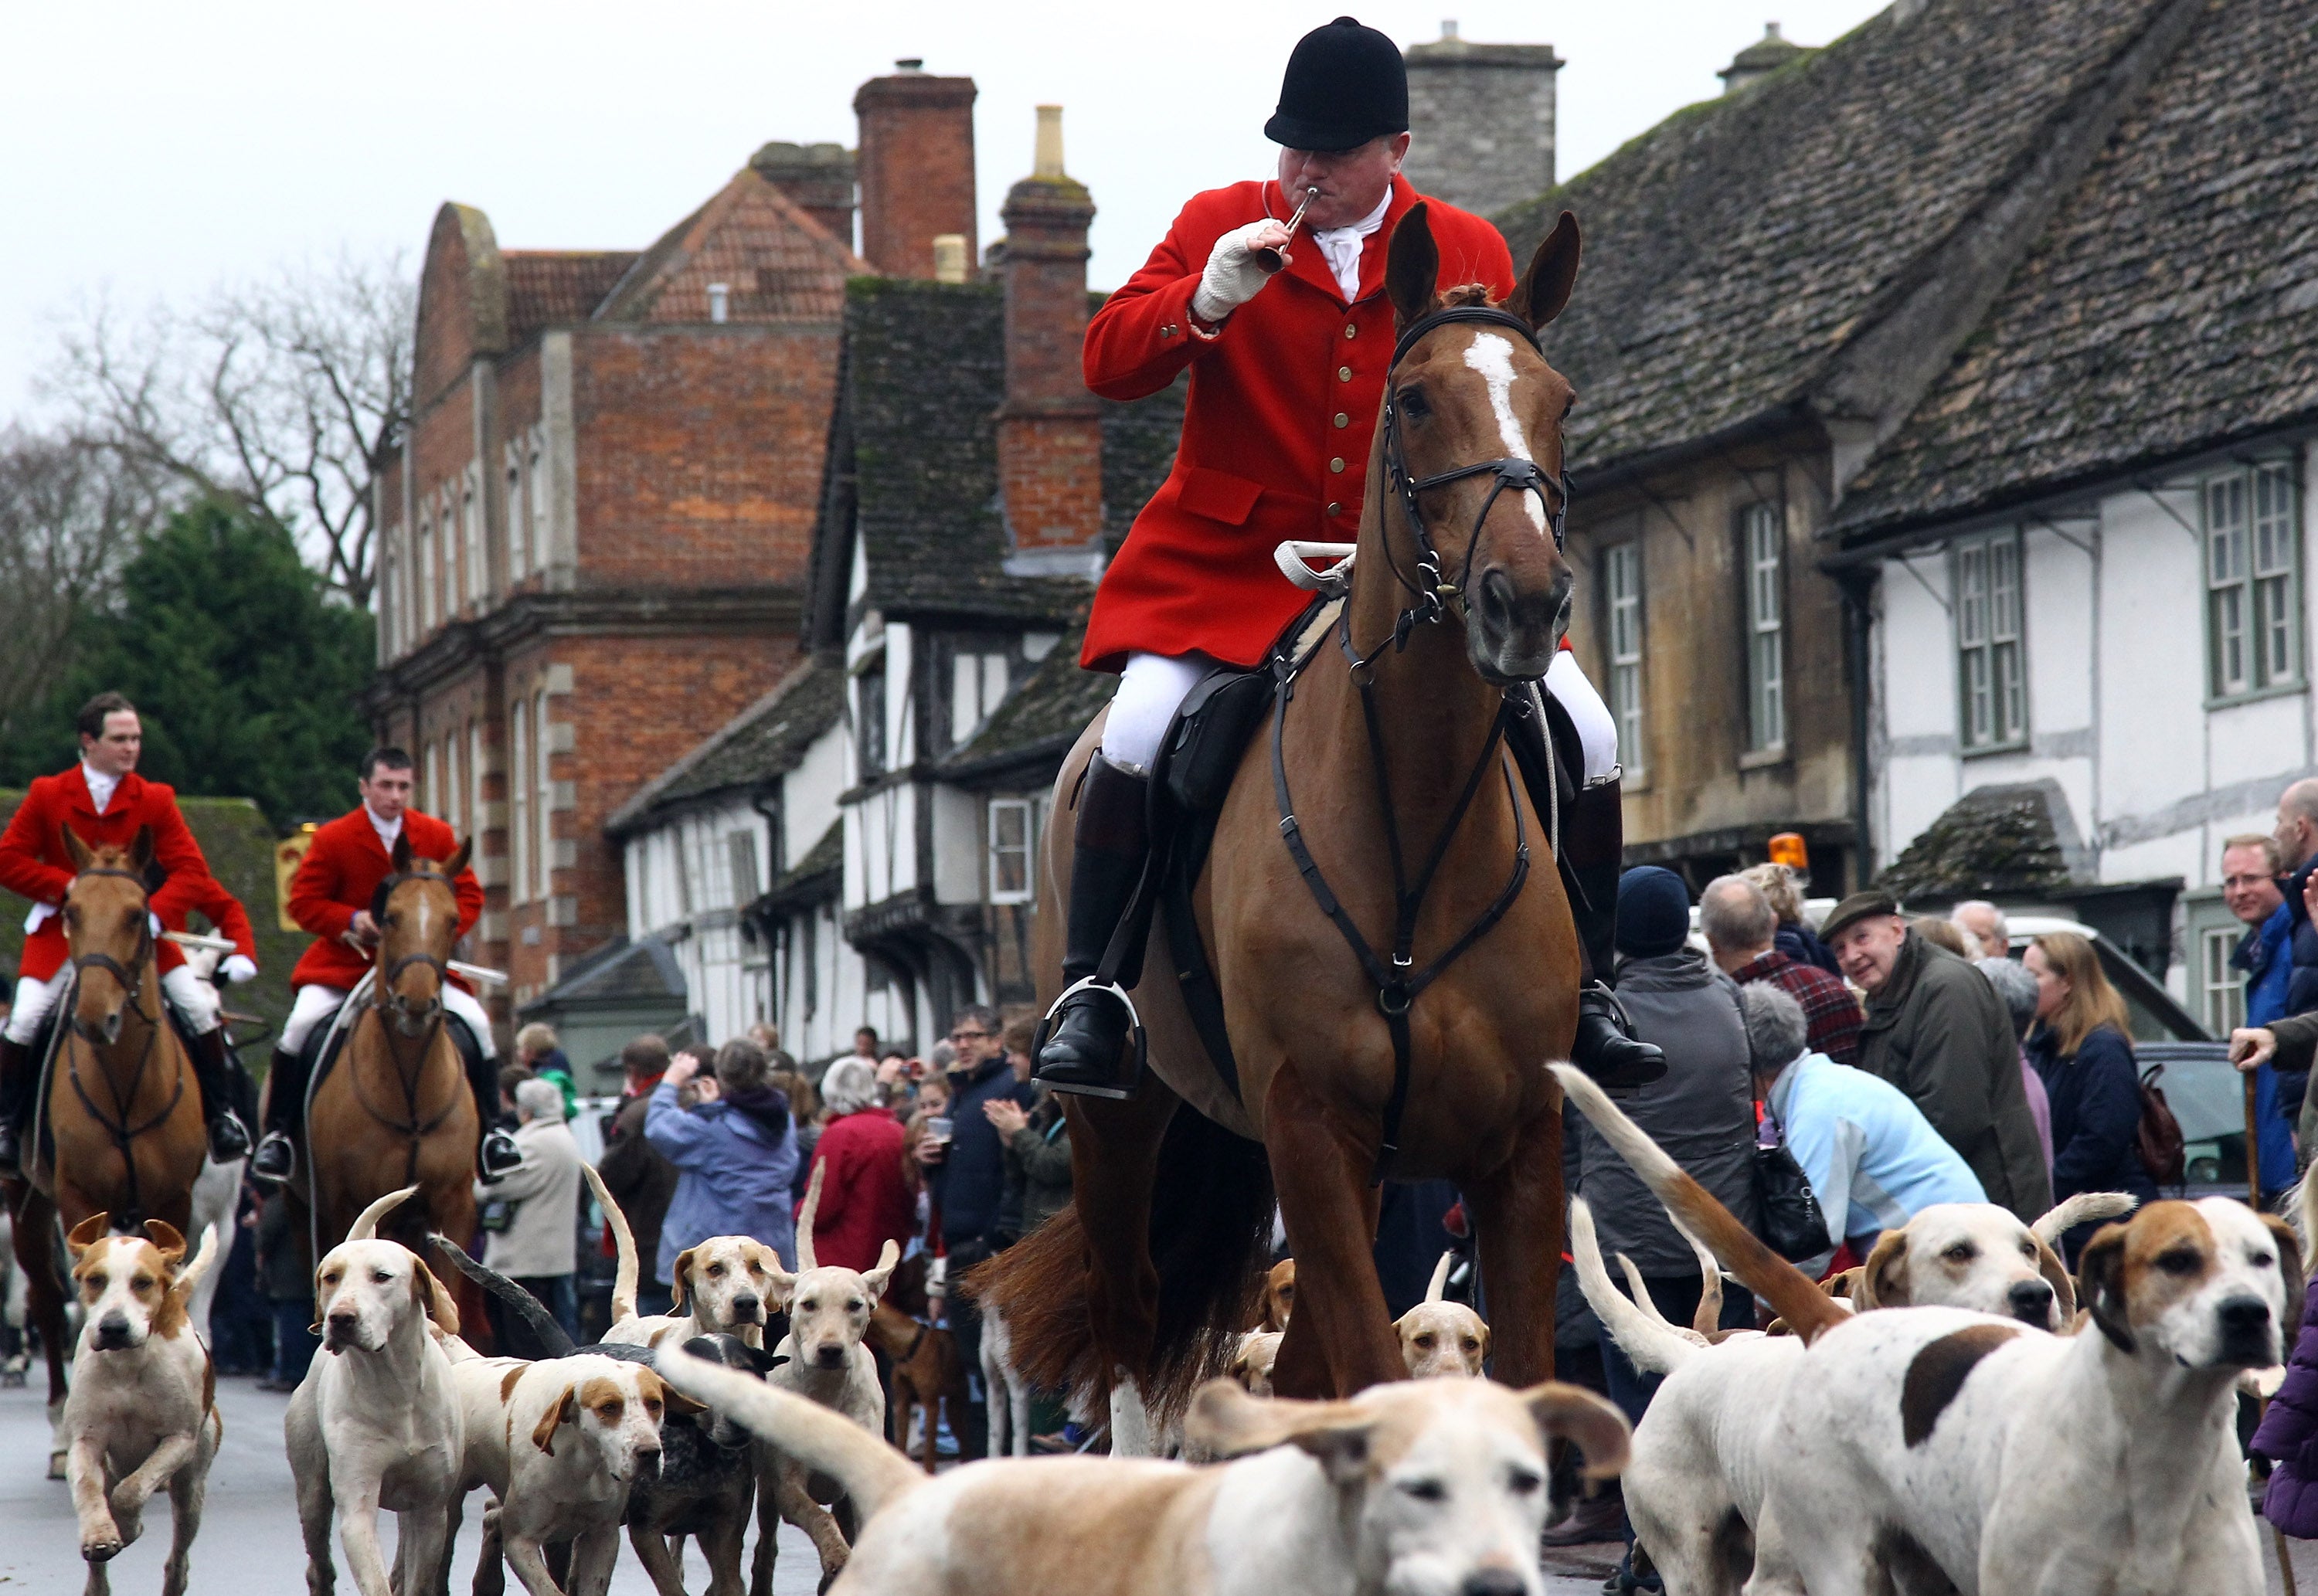 Fox hunters ride through the village of Lacock during a traditional Boxing Day Hunt in 2011